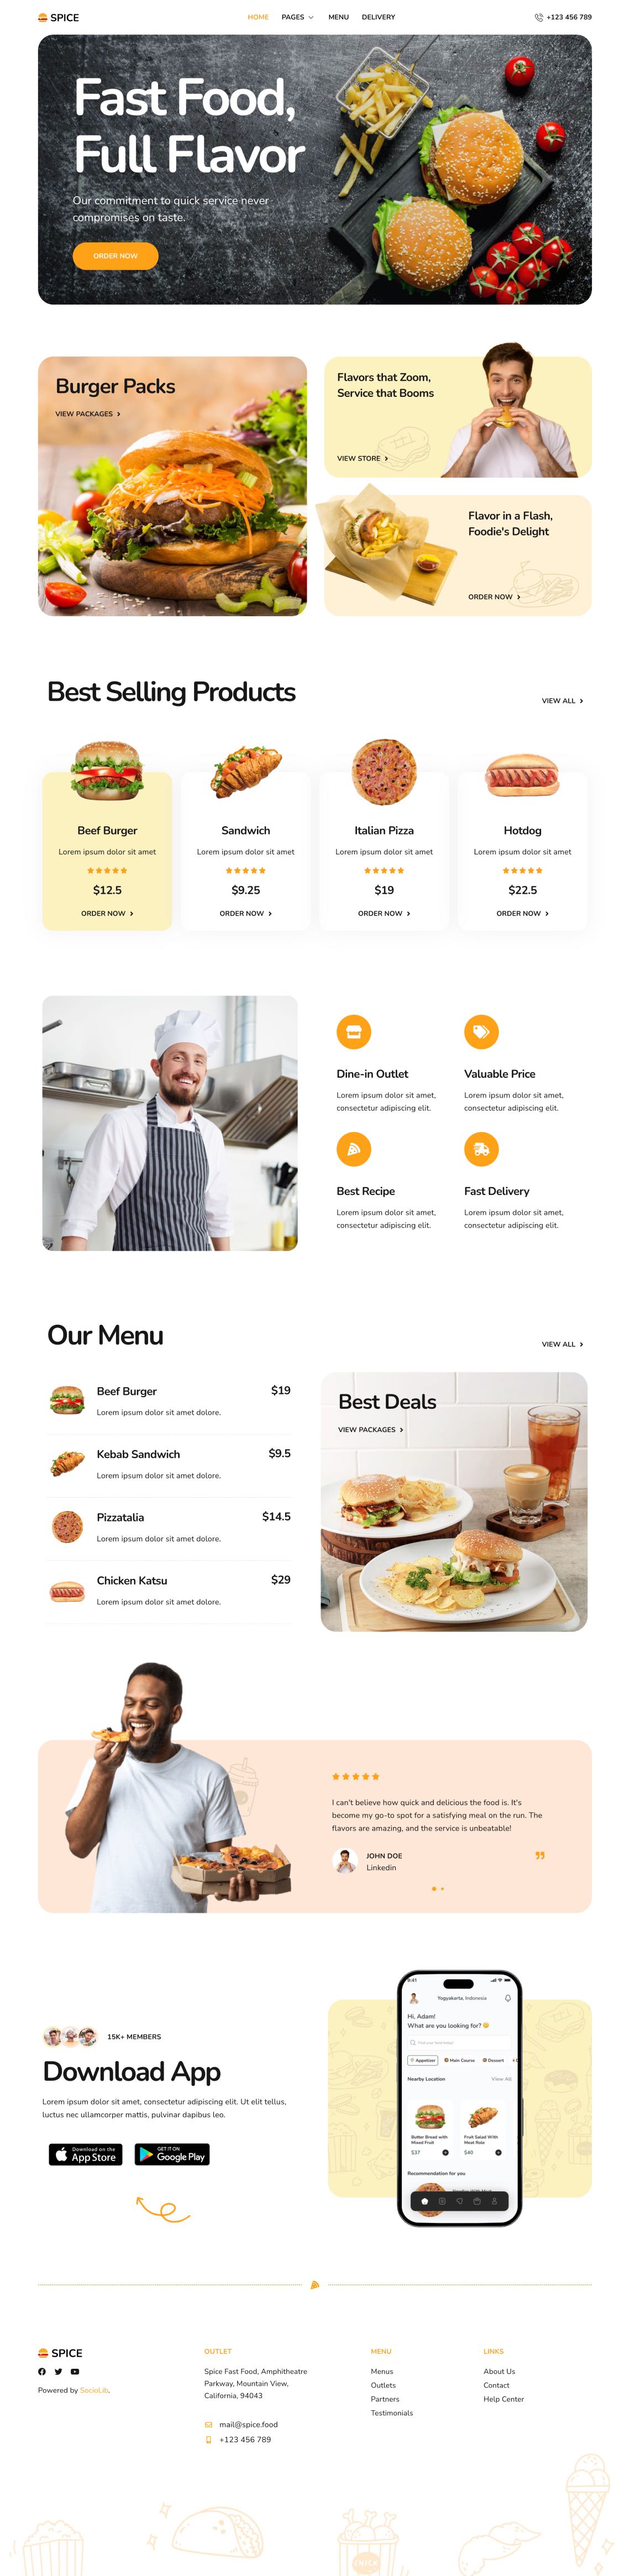 Spice - Fast Food & Delivery Restaurant Elementor Template Kit by sociolib